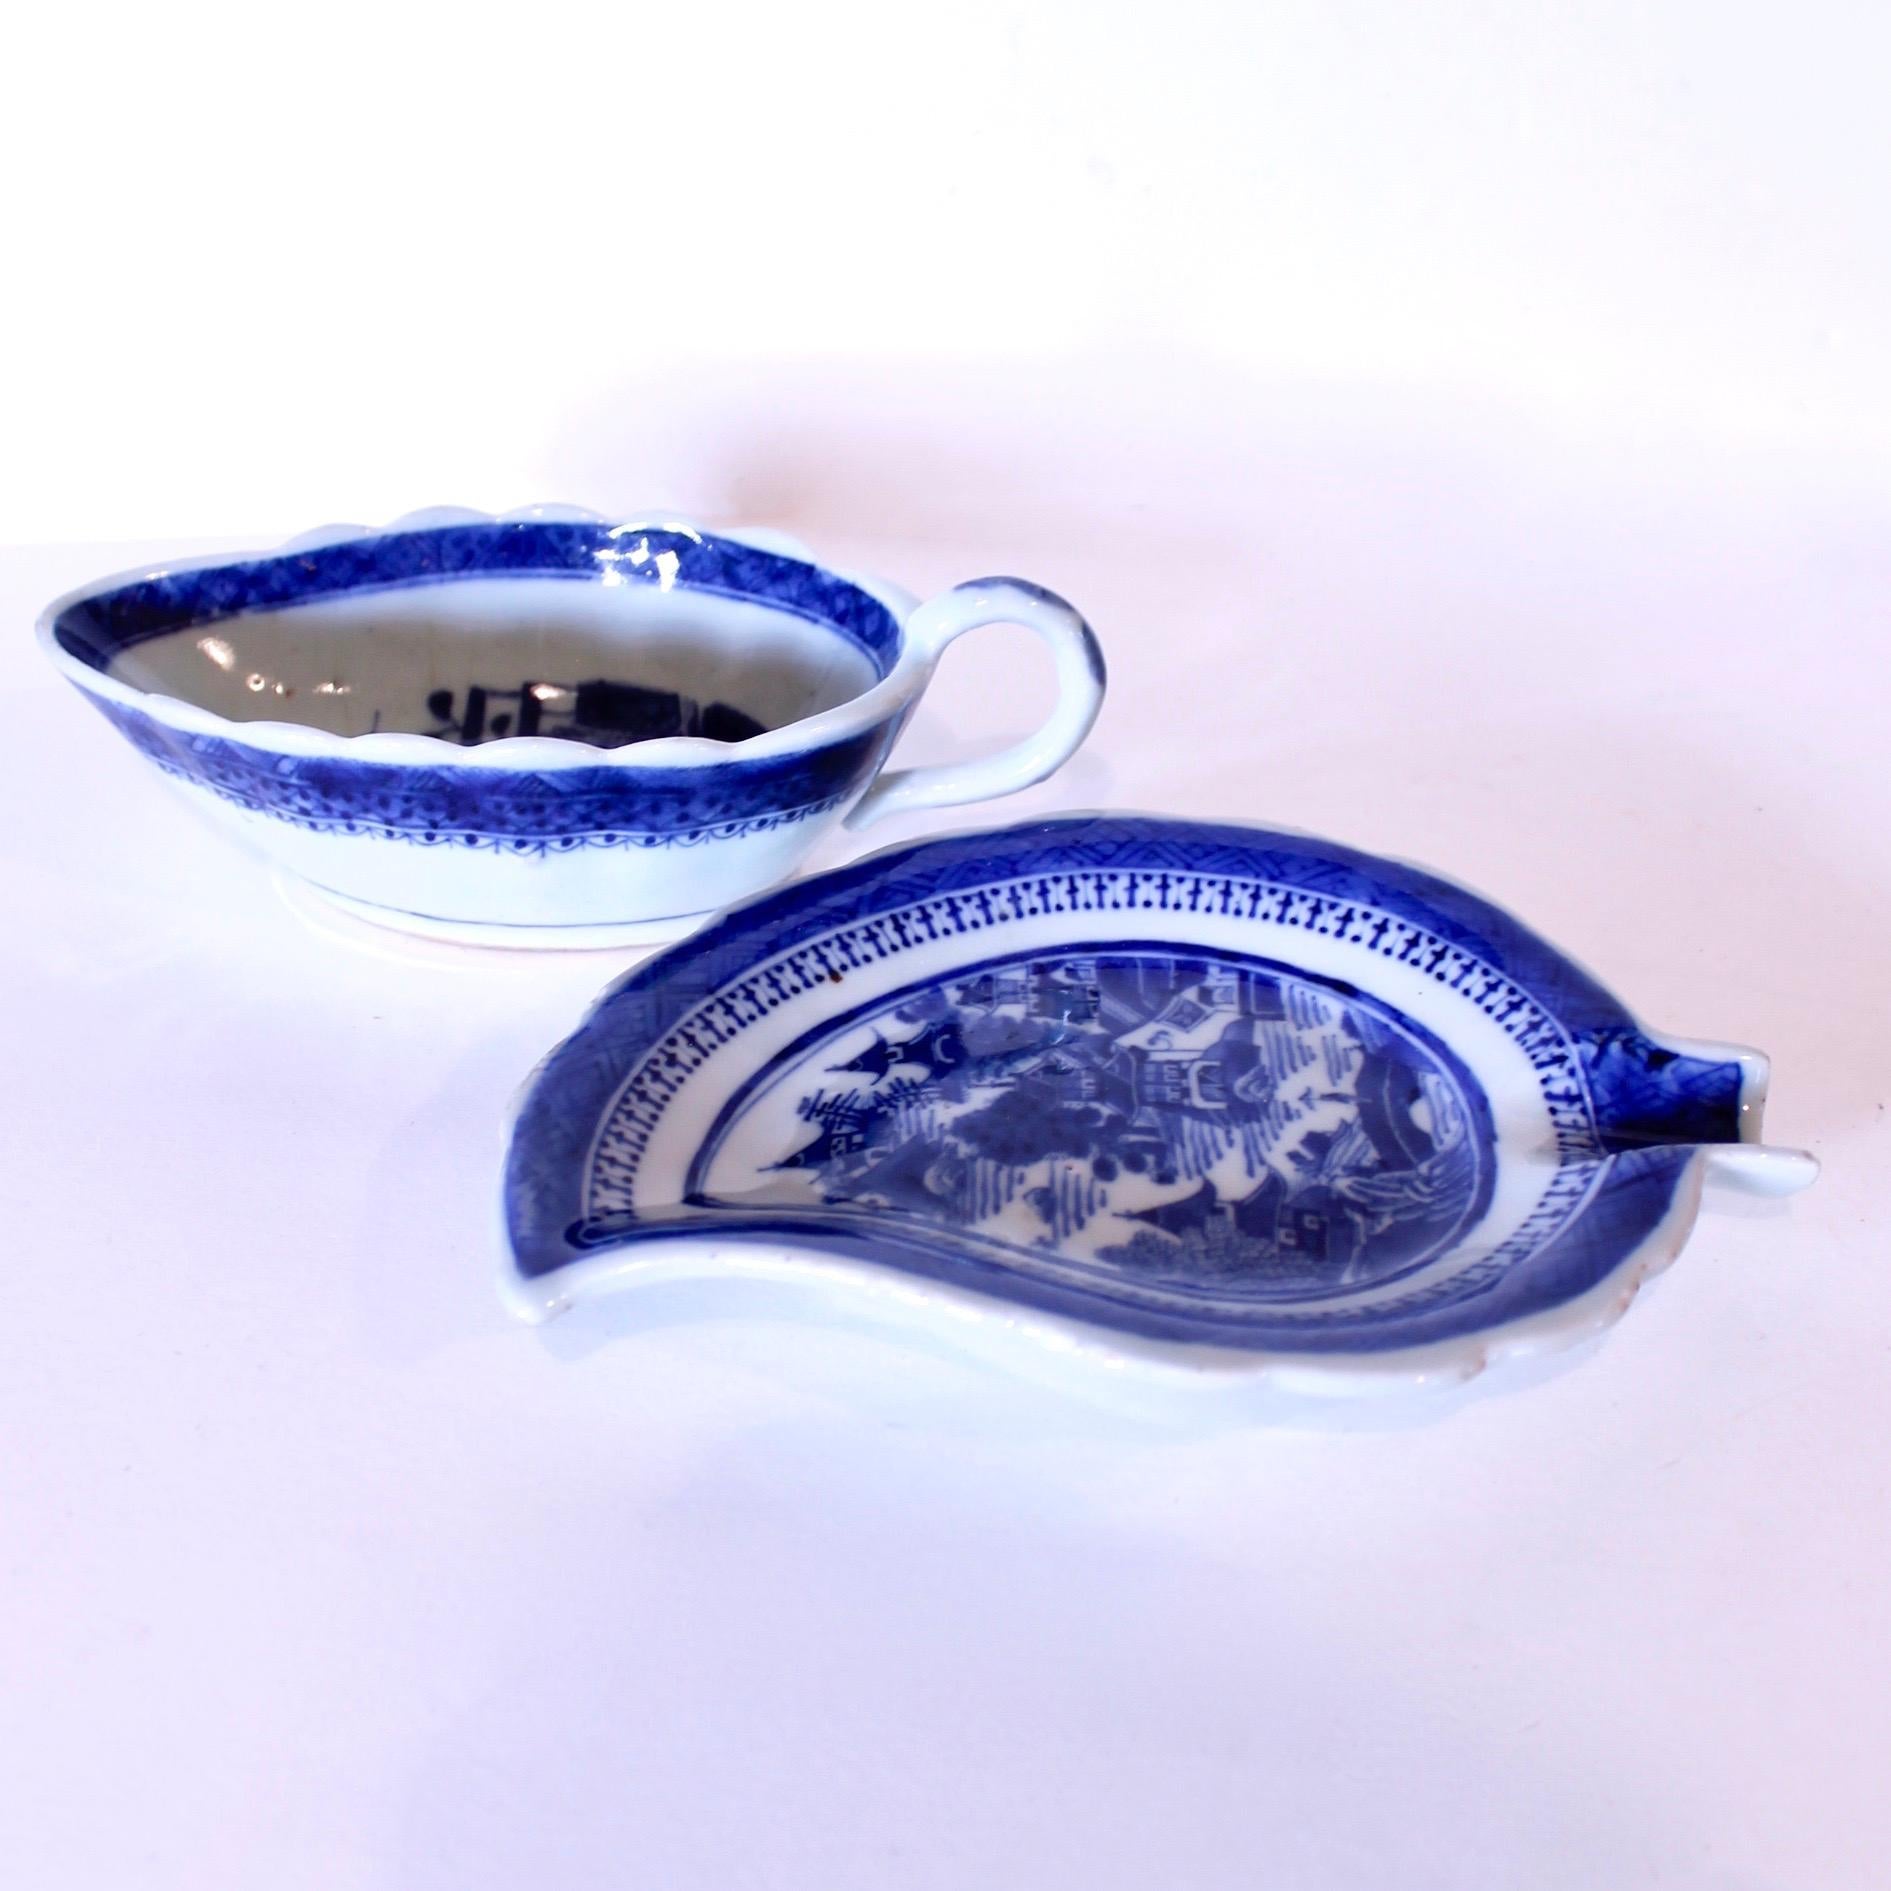 Chinese Export Nanking Porcelain Sauceboat And Undertray, 19th Century In Good Condition For Sale In Free Union, VA